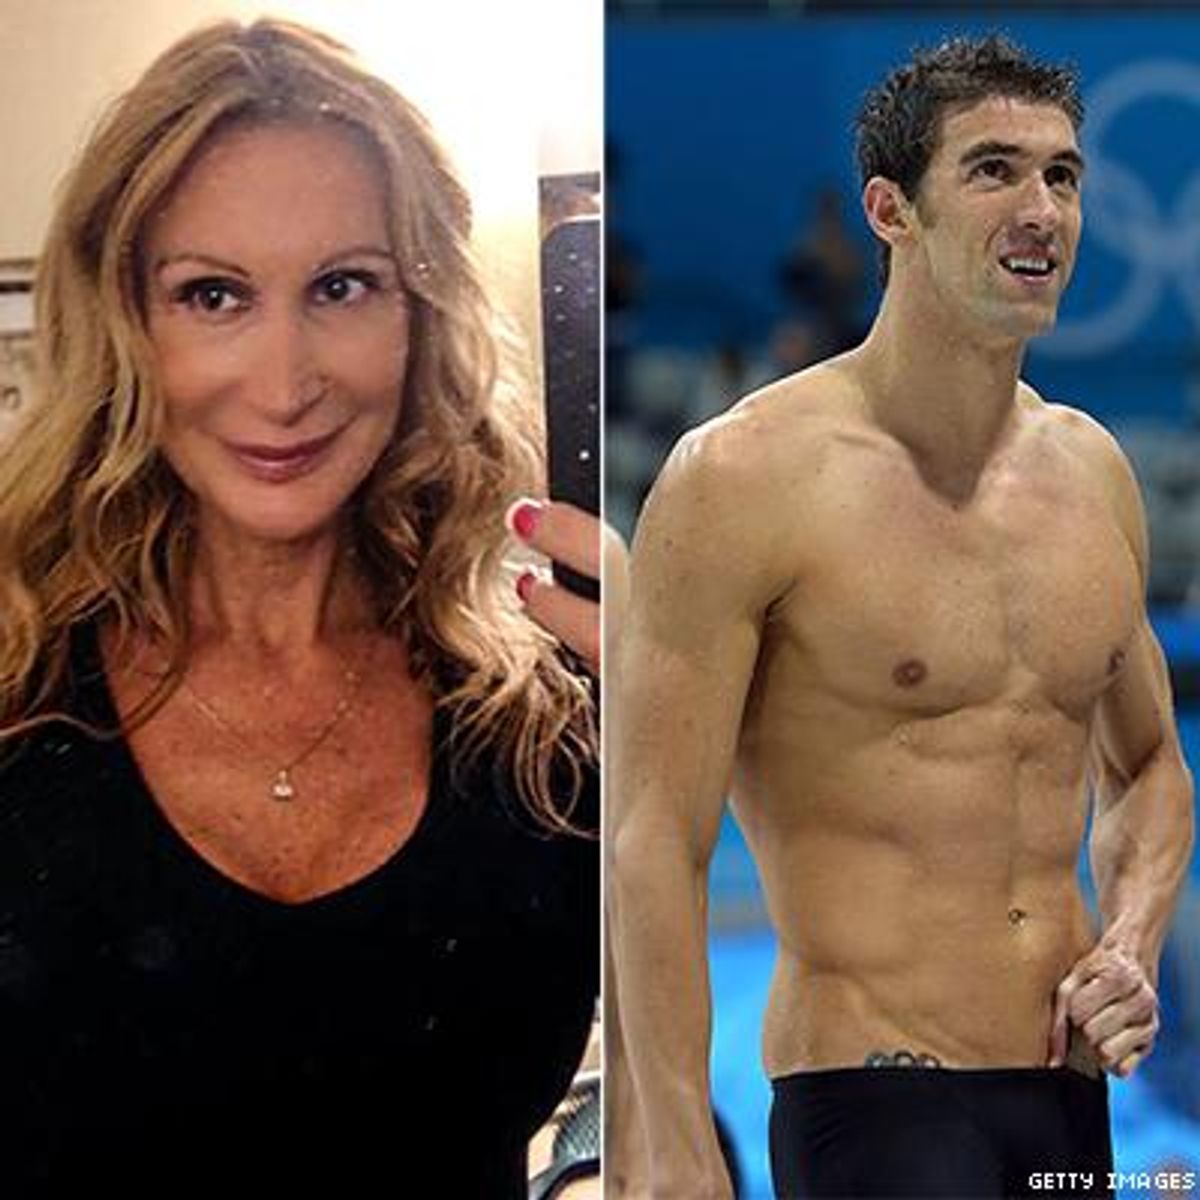 Taylor-lianne-chandler-and-michael-phelps-x400d